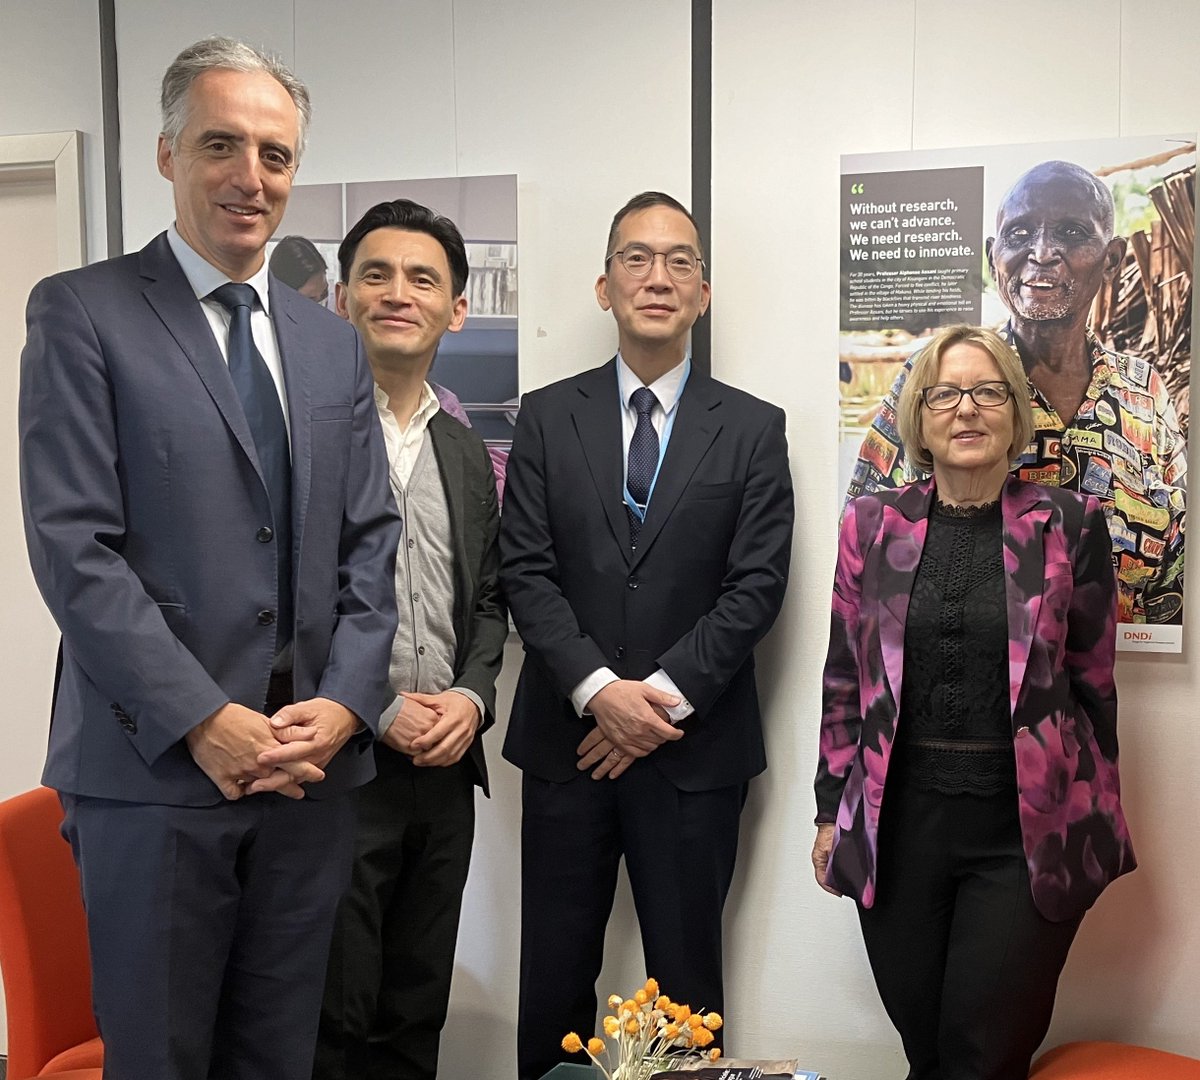 Thank you Dr. Hajime Inoue and @MHLWitter for a productive meeting with us at @DNDi during #WHA77 last week, to discuss collaboration for inclusive R&D and equitable access to health tools. I look forward to continuing #InnovatingTogether towards elimination of #NTDs!